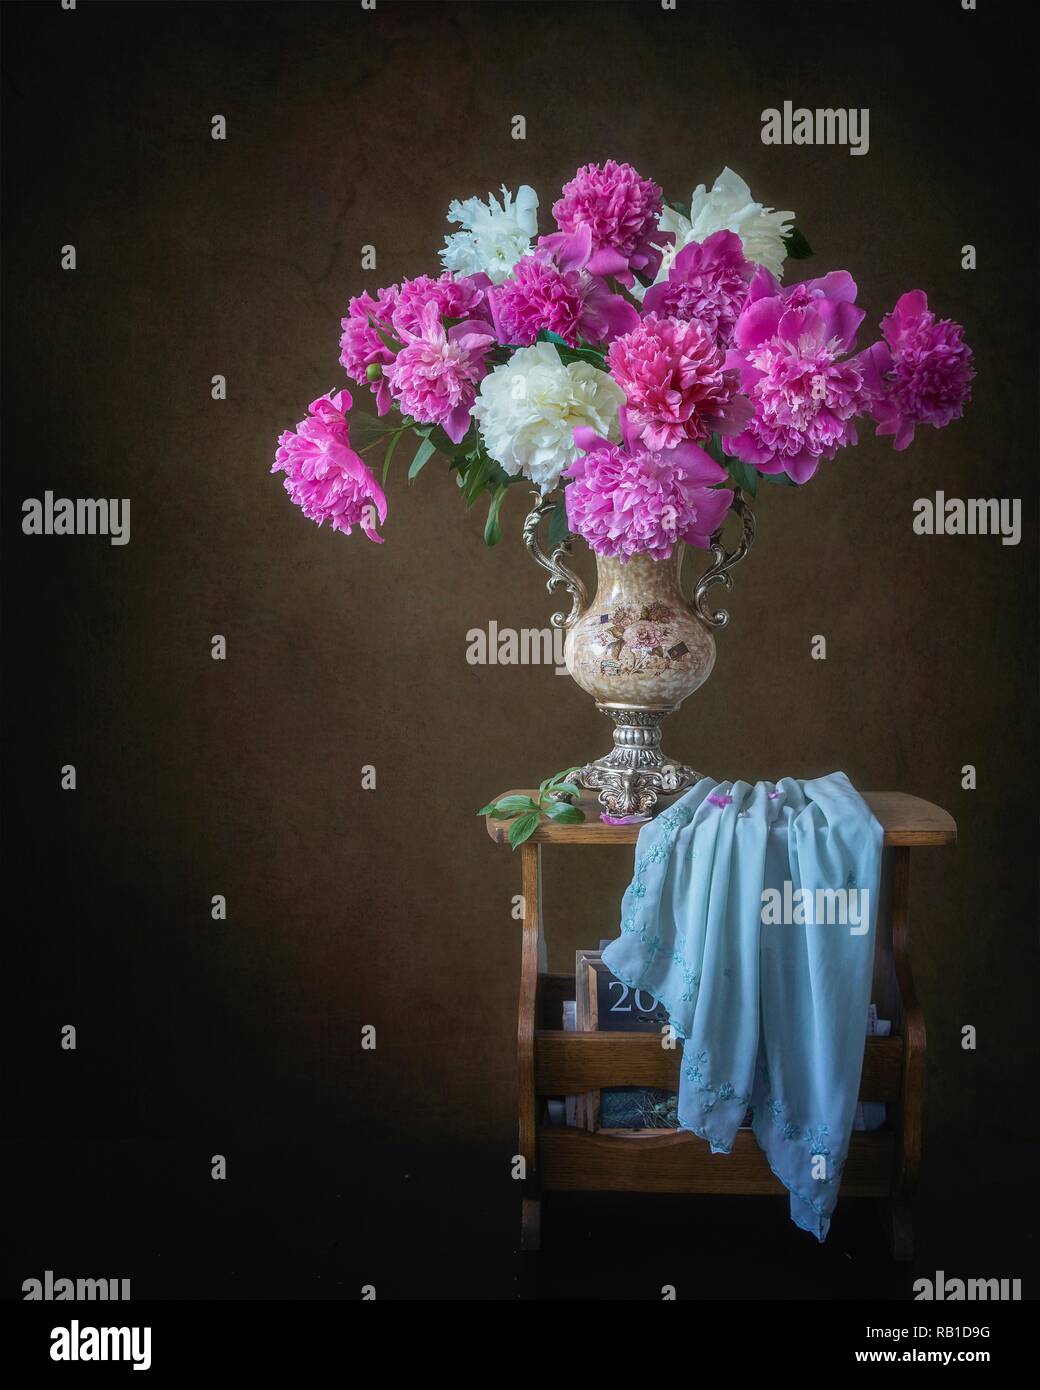 Still life with bouquet of peonies Stock Photo - Alamy